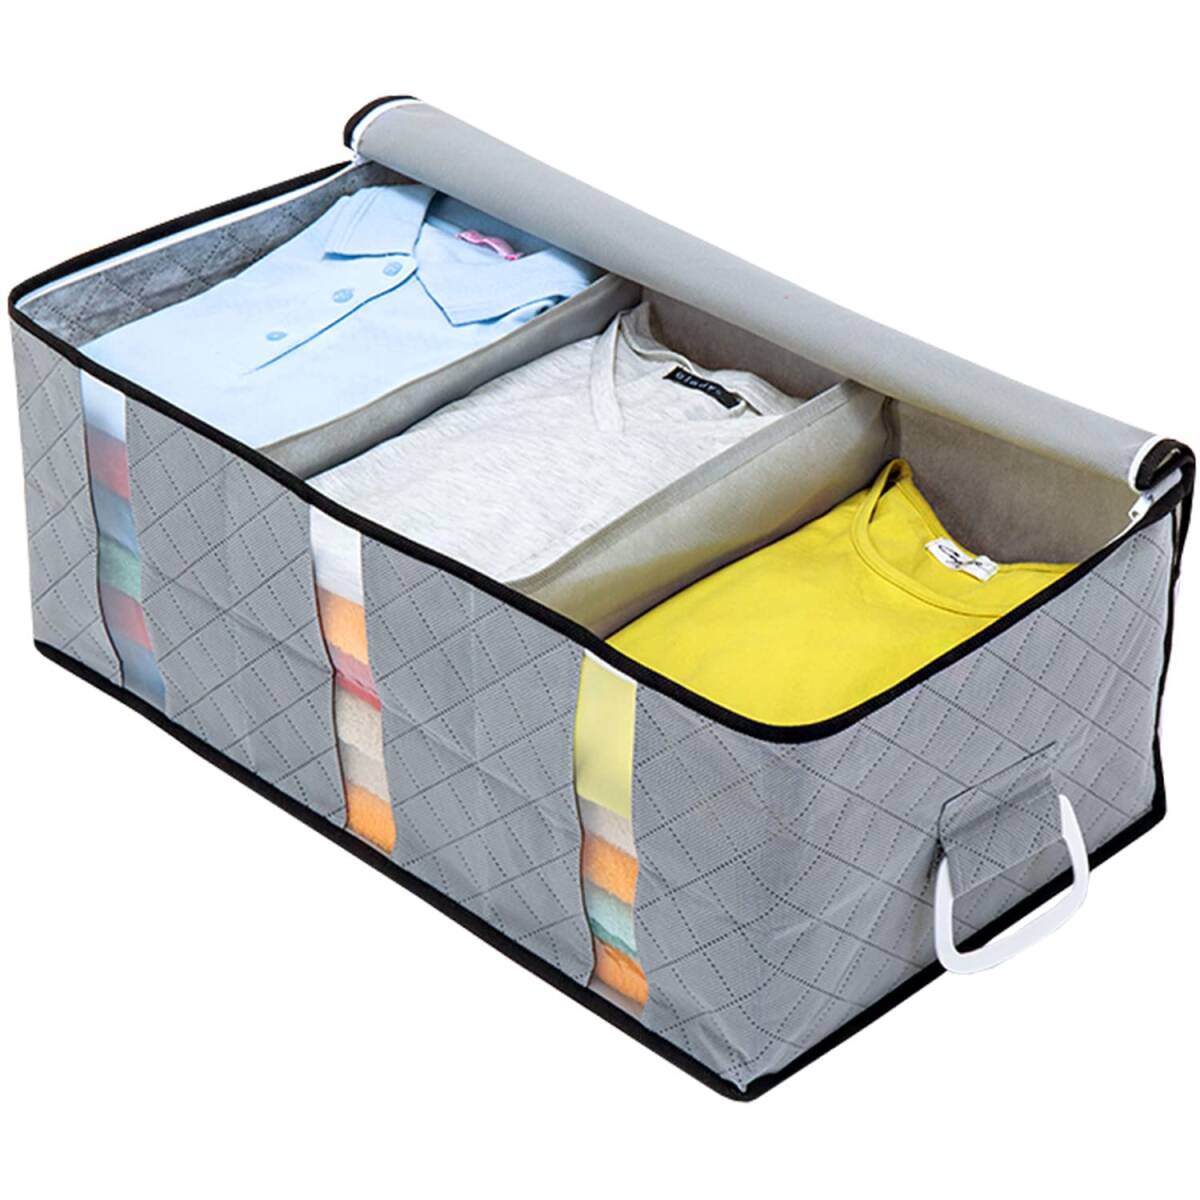  Astro storage case clothes for bulkhead .2. place attaching gray non-woven activated charcoal deodorization clothes storage sack storage box keep hand attaching 171-46